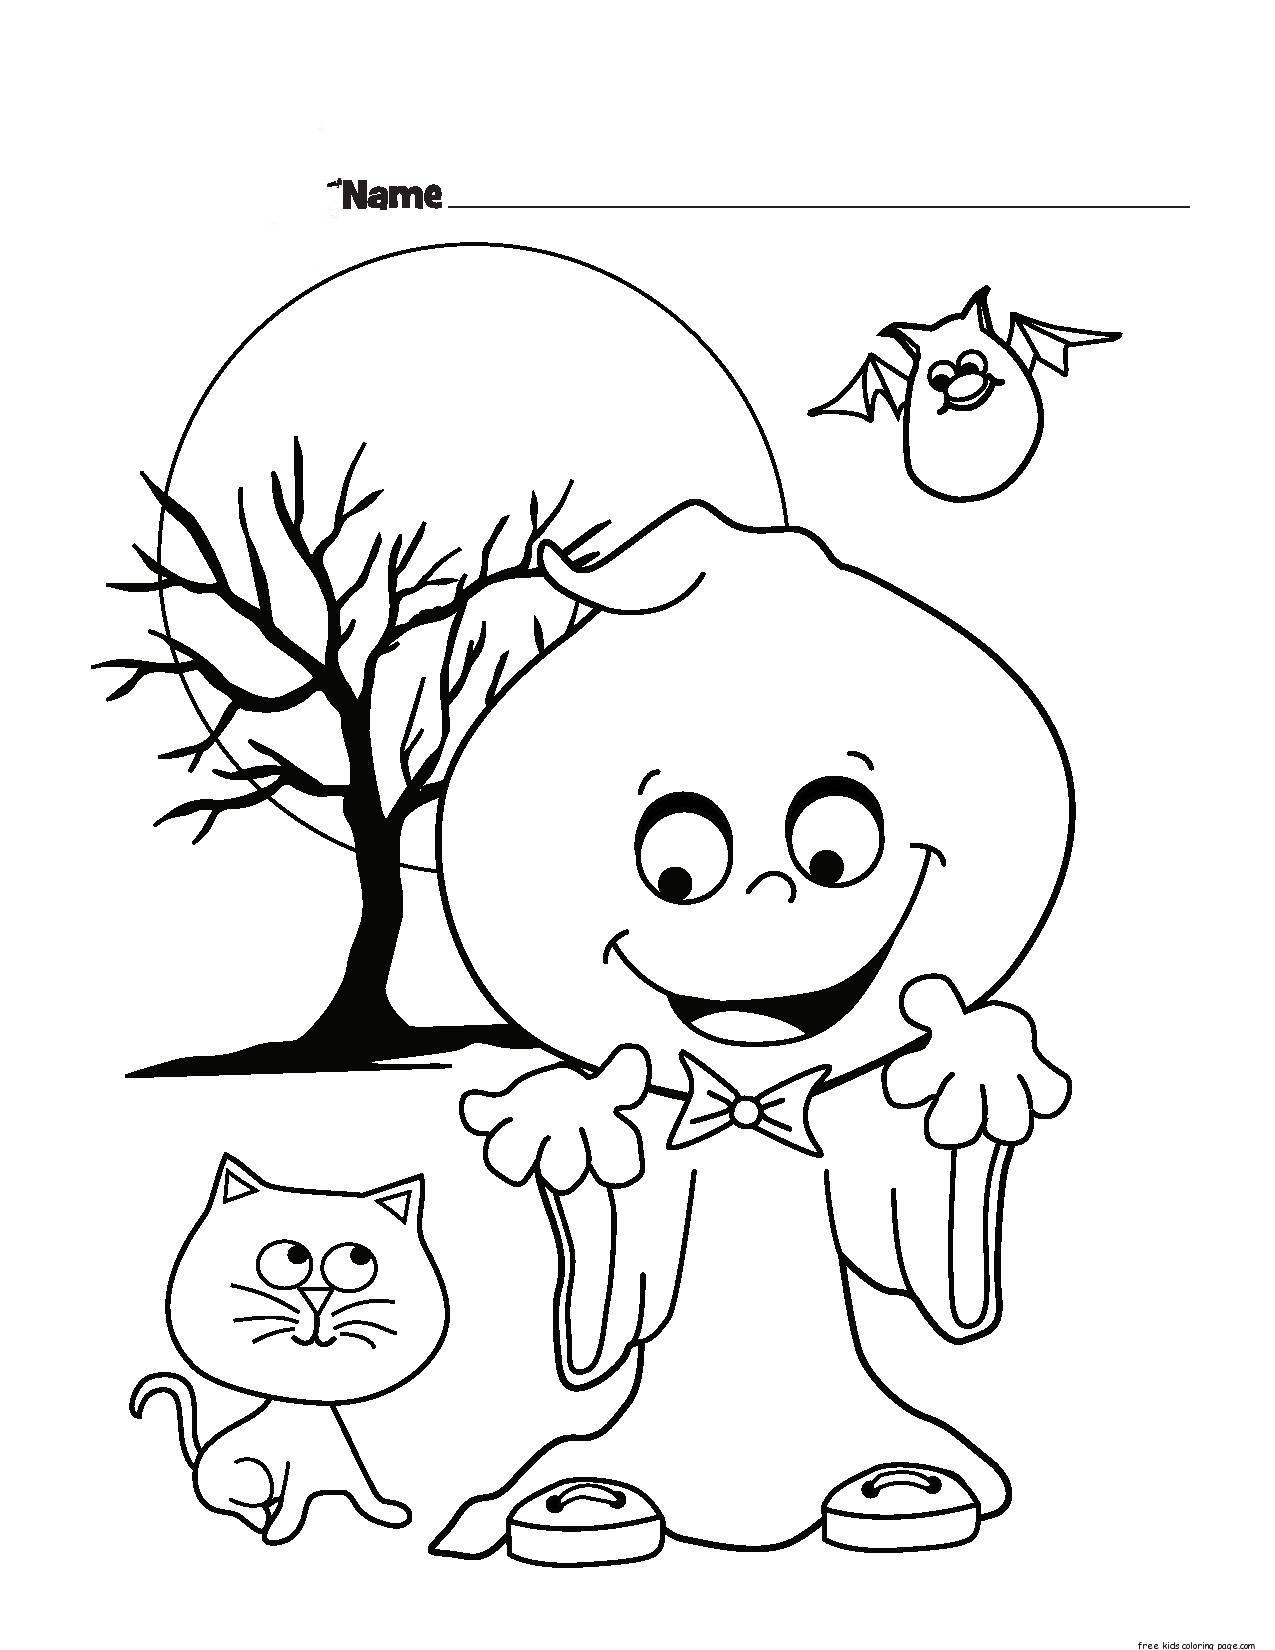 Coloring Pages For Toddlers To Print
 halloween ghost printable coloring pages for kidsFree